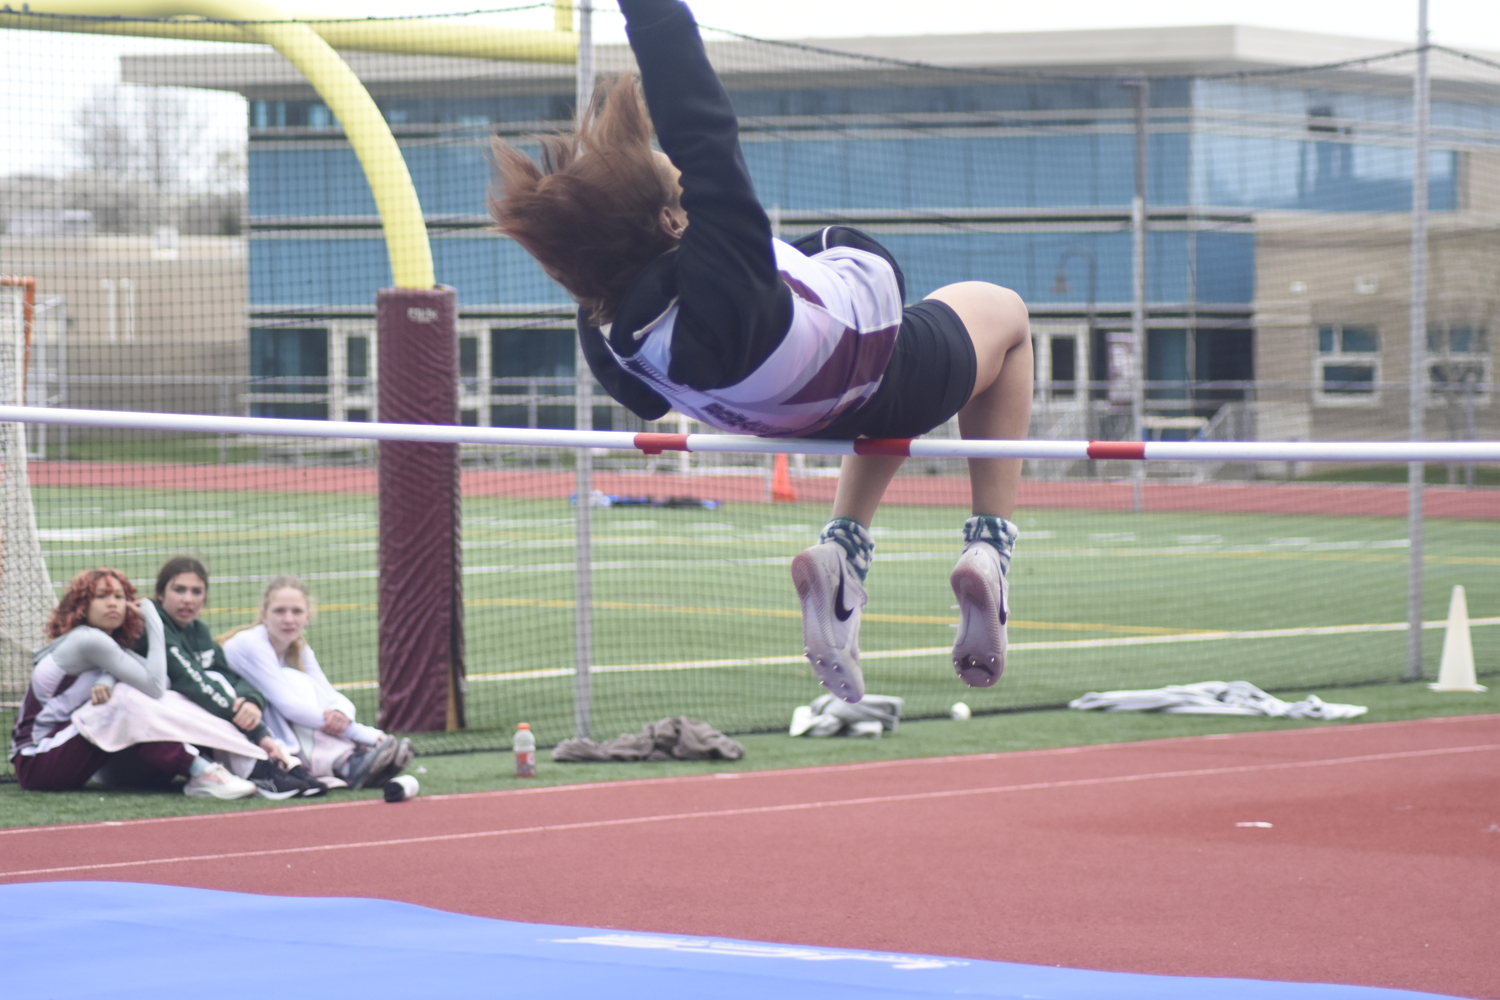 Kayla Kenlock won the high jump after clearing 4 feet 8 inches on Friday.   DREW BUDD